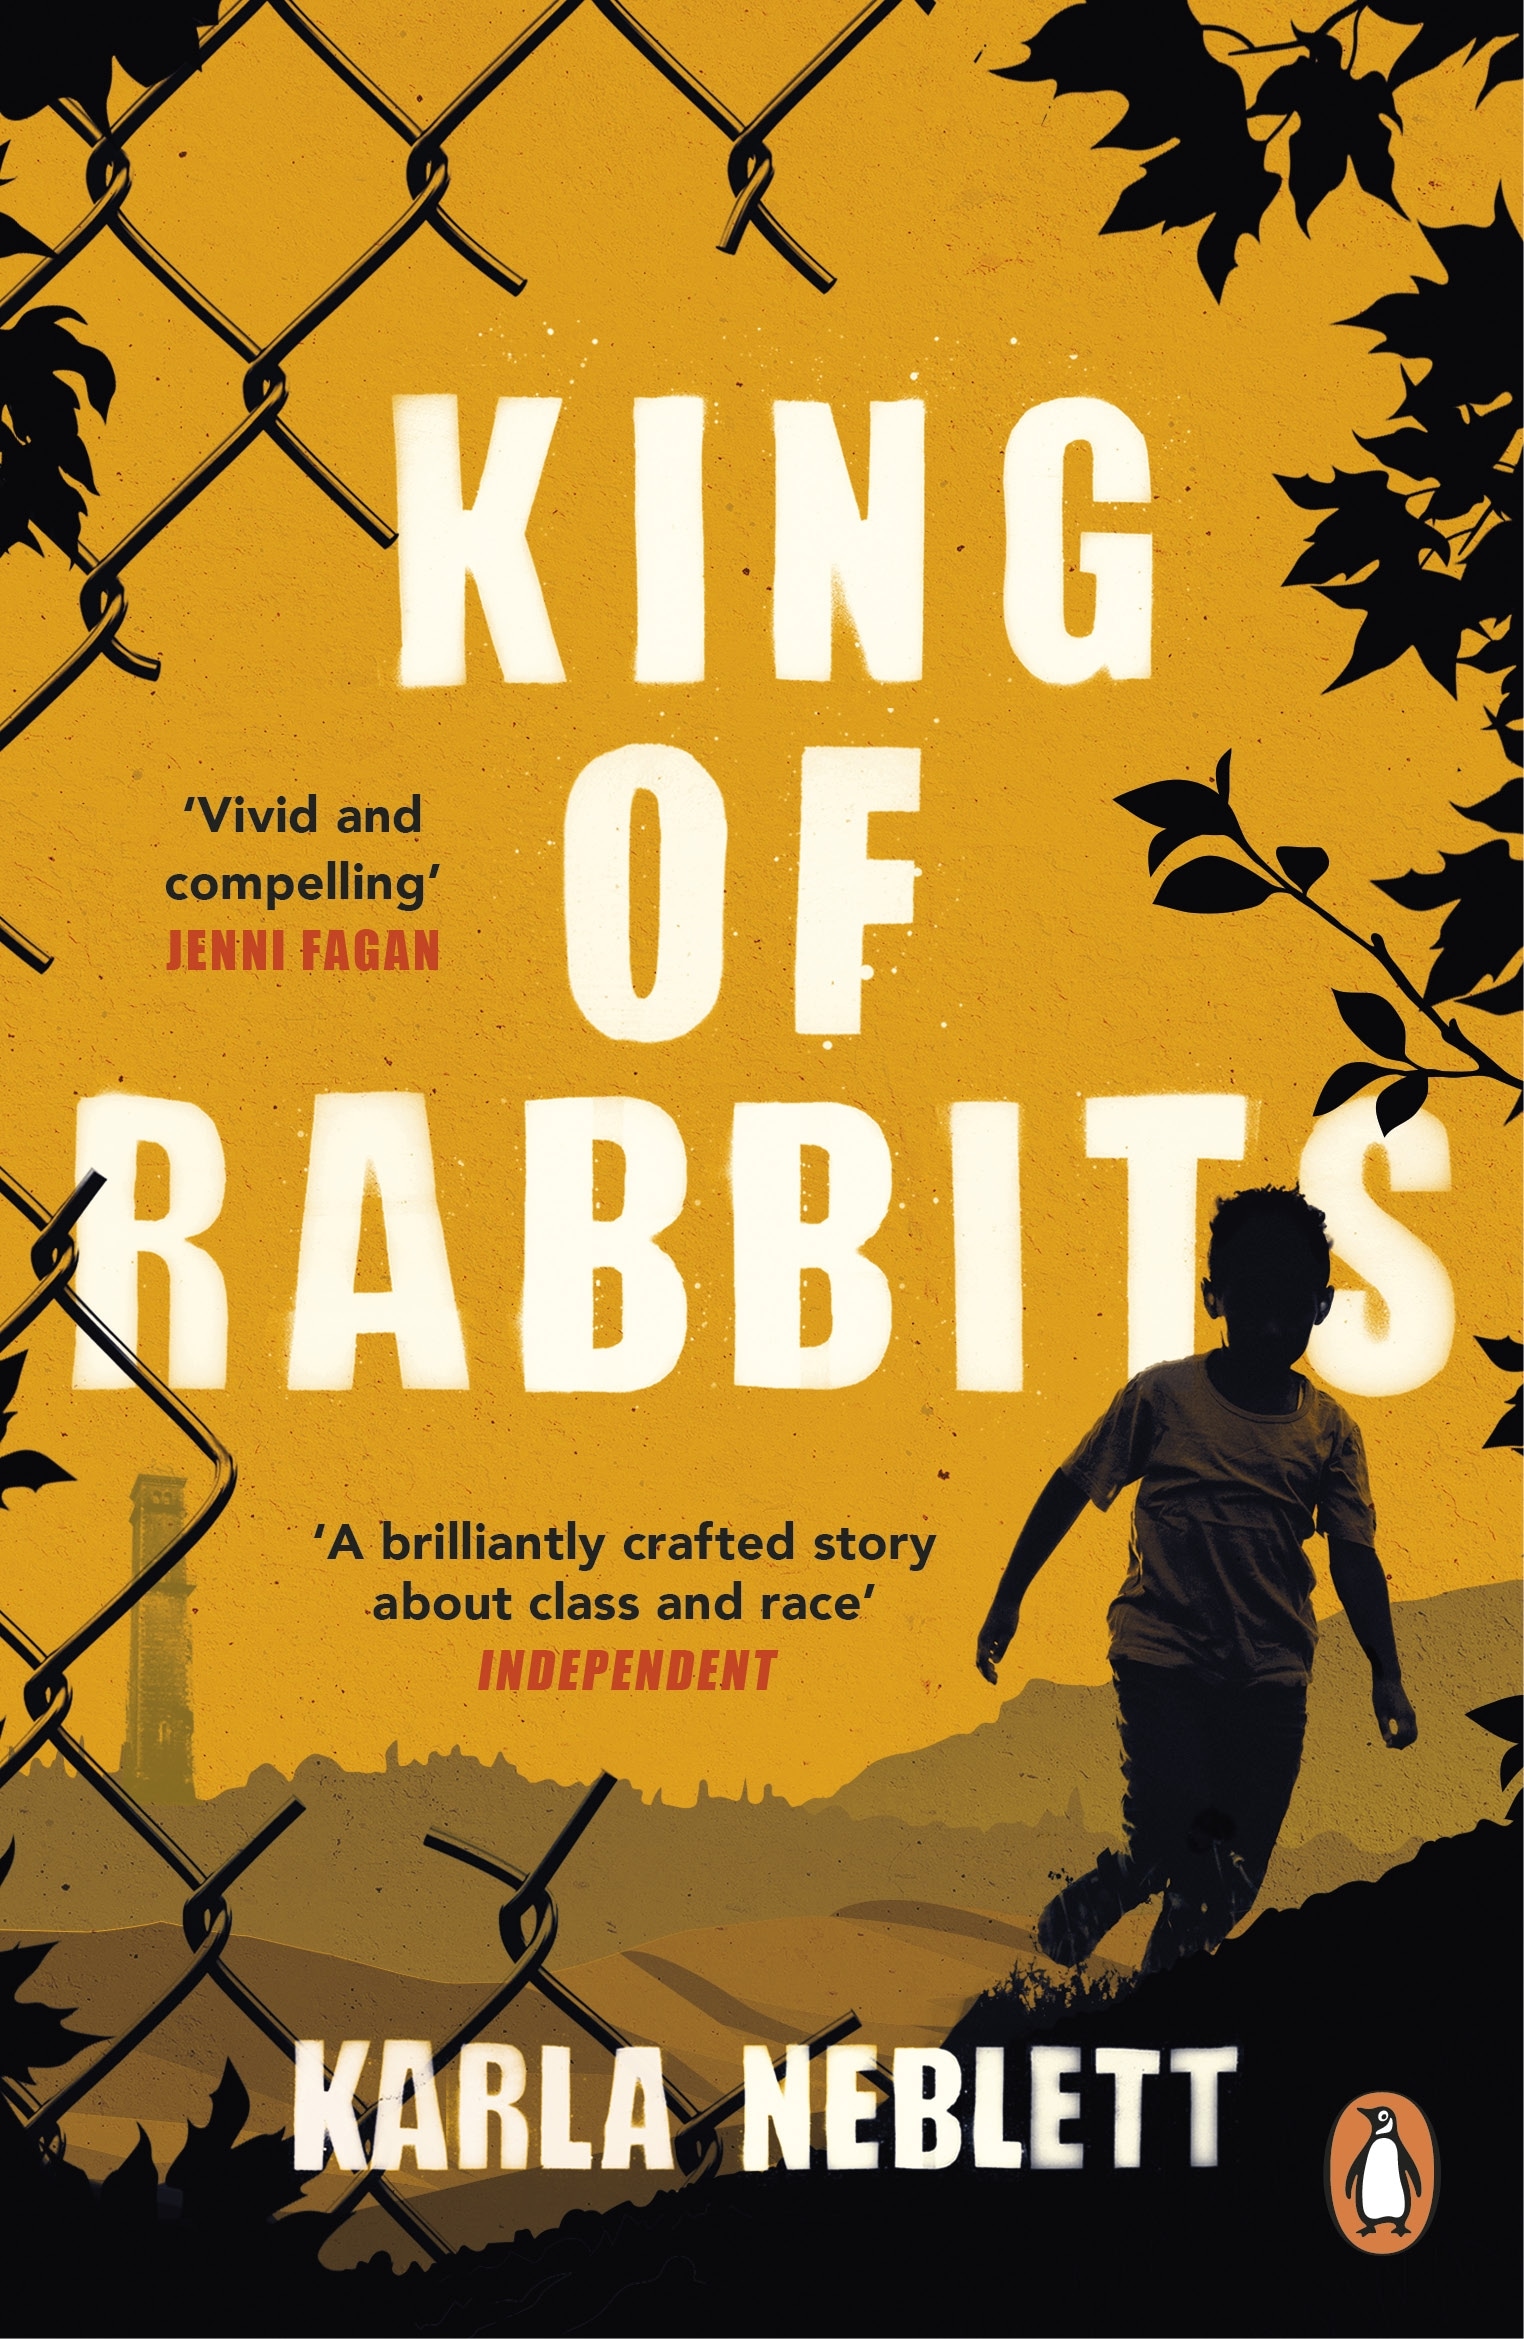 Book “King of Rabbits” by Karla Neblett — March 10, 2022